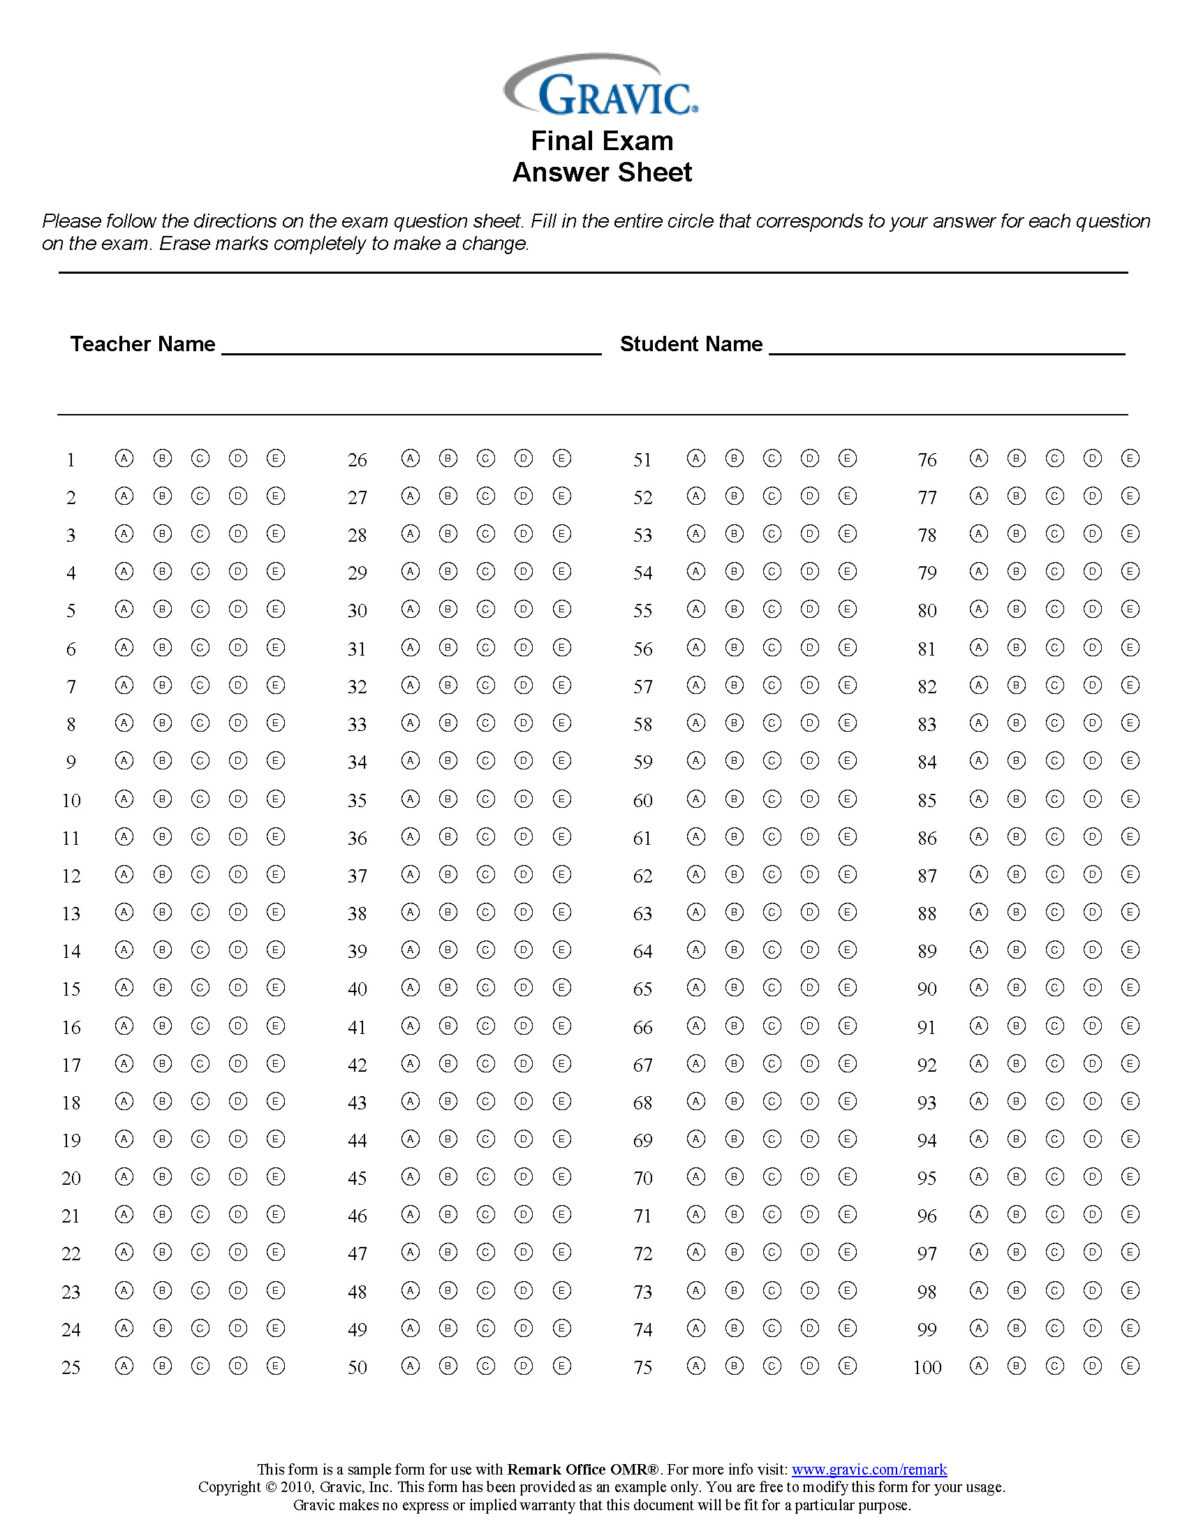 Final Exam 100 Question Test Answer Sheet · Remark Software With Blank